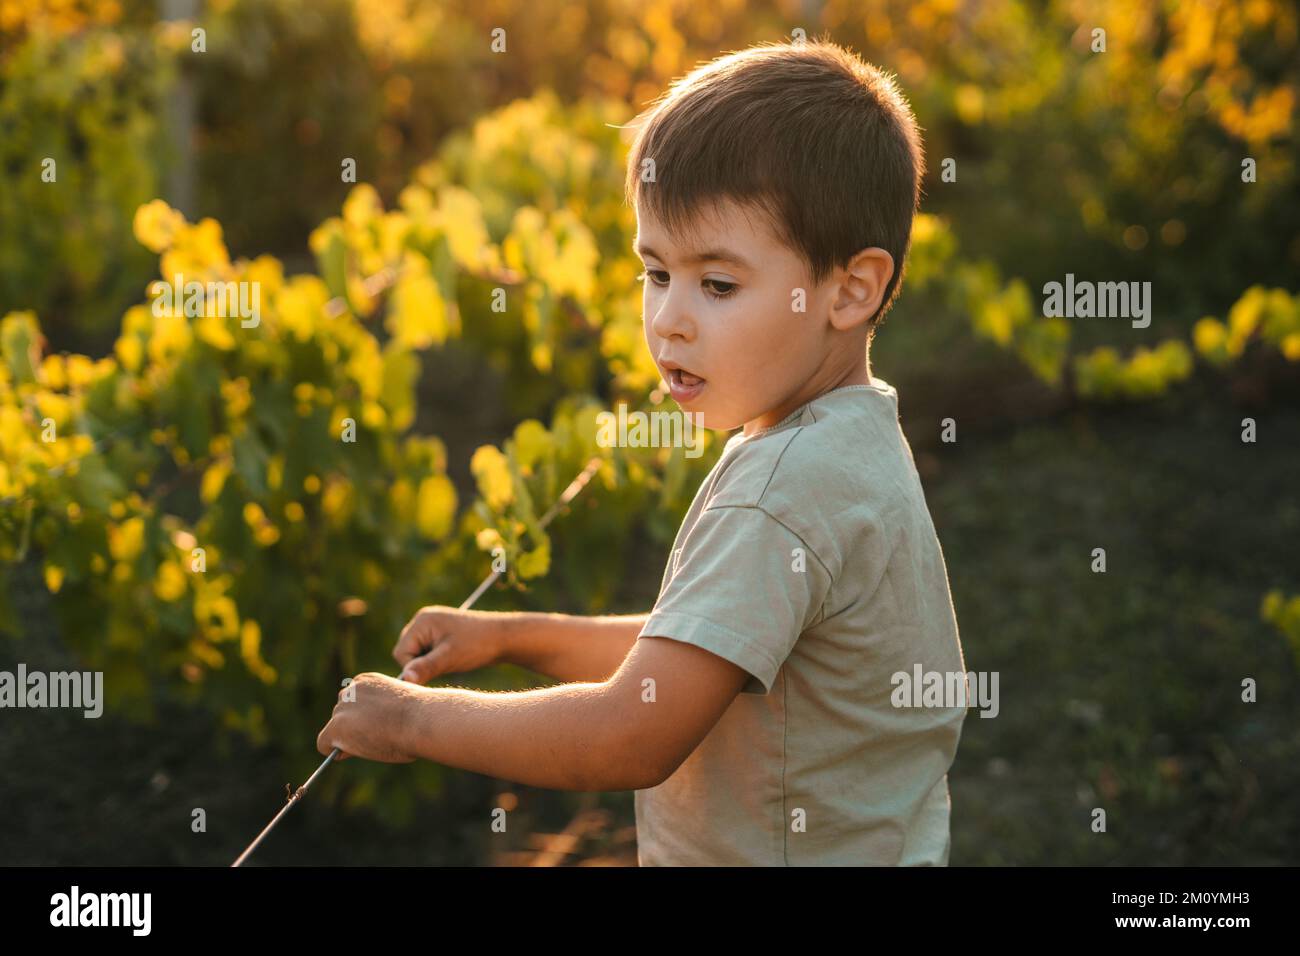 Caucasian boy standing in a vineyard at sunset holding a vine. Sunny autumn sunset. Illuminated by the setting sun. Stands next to the vineyards Stock Photo